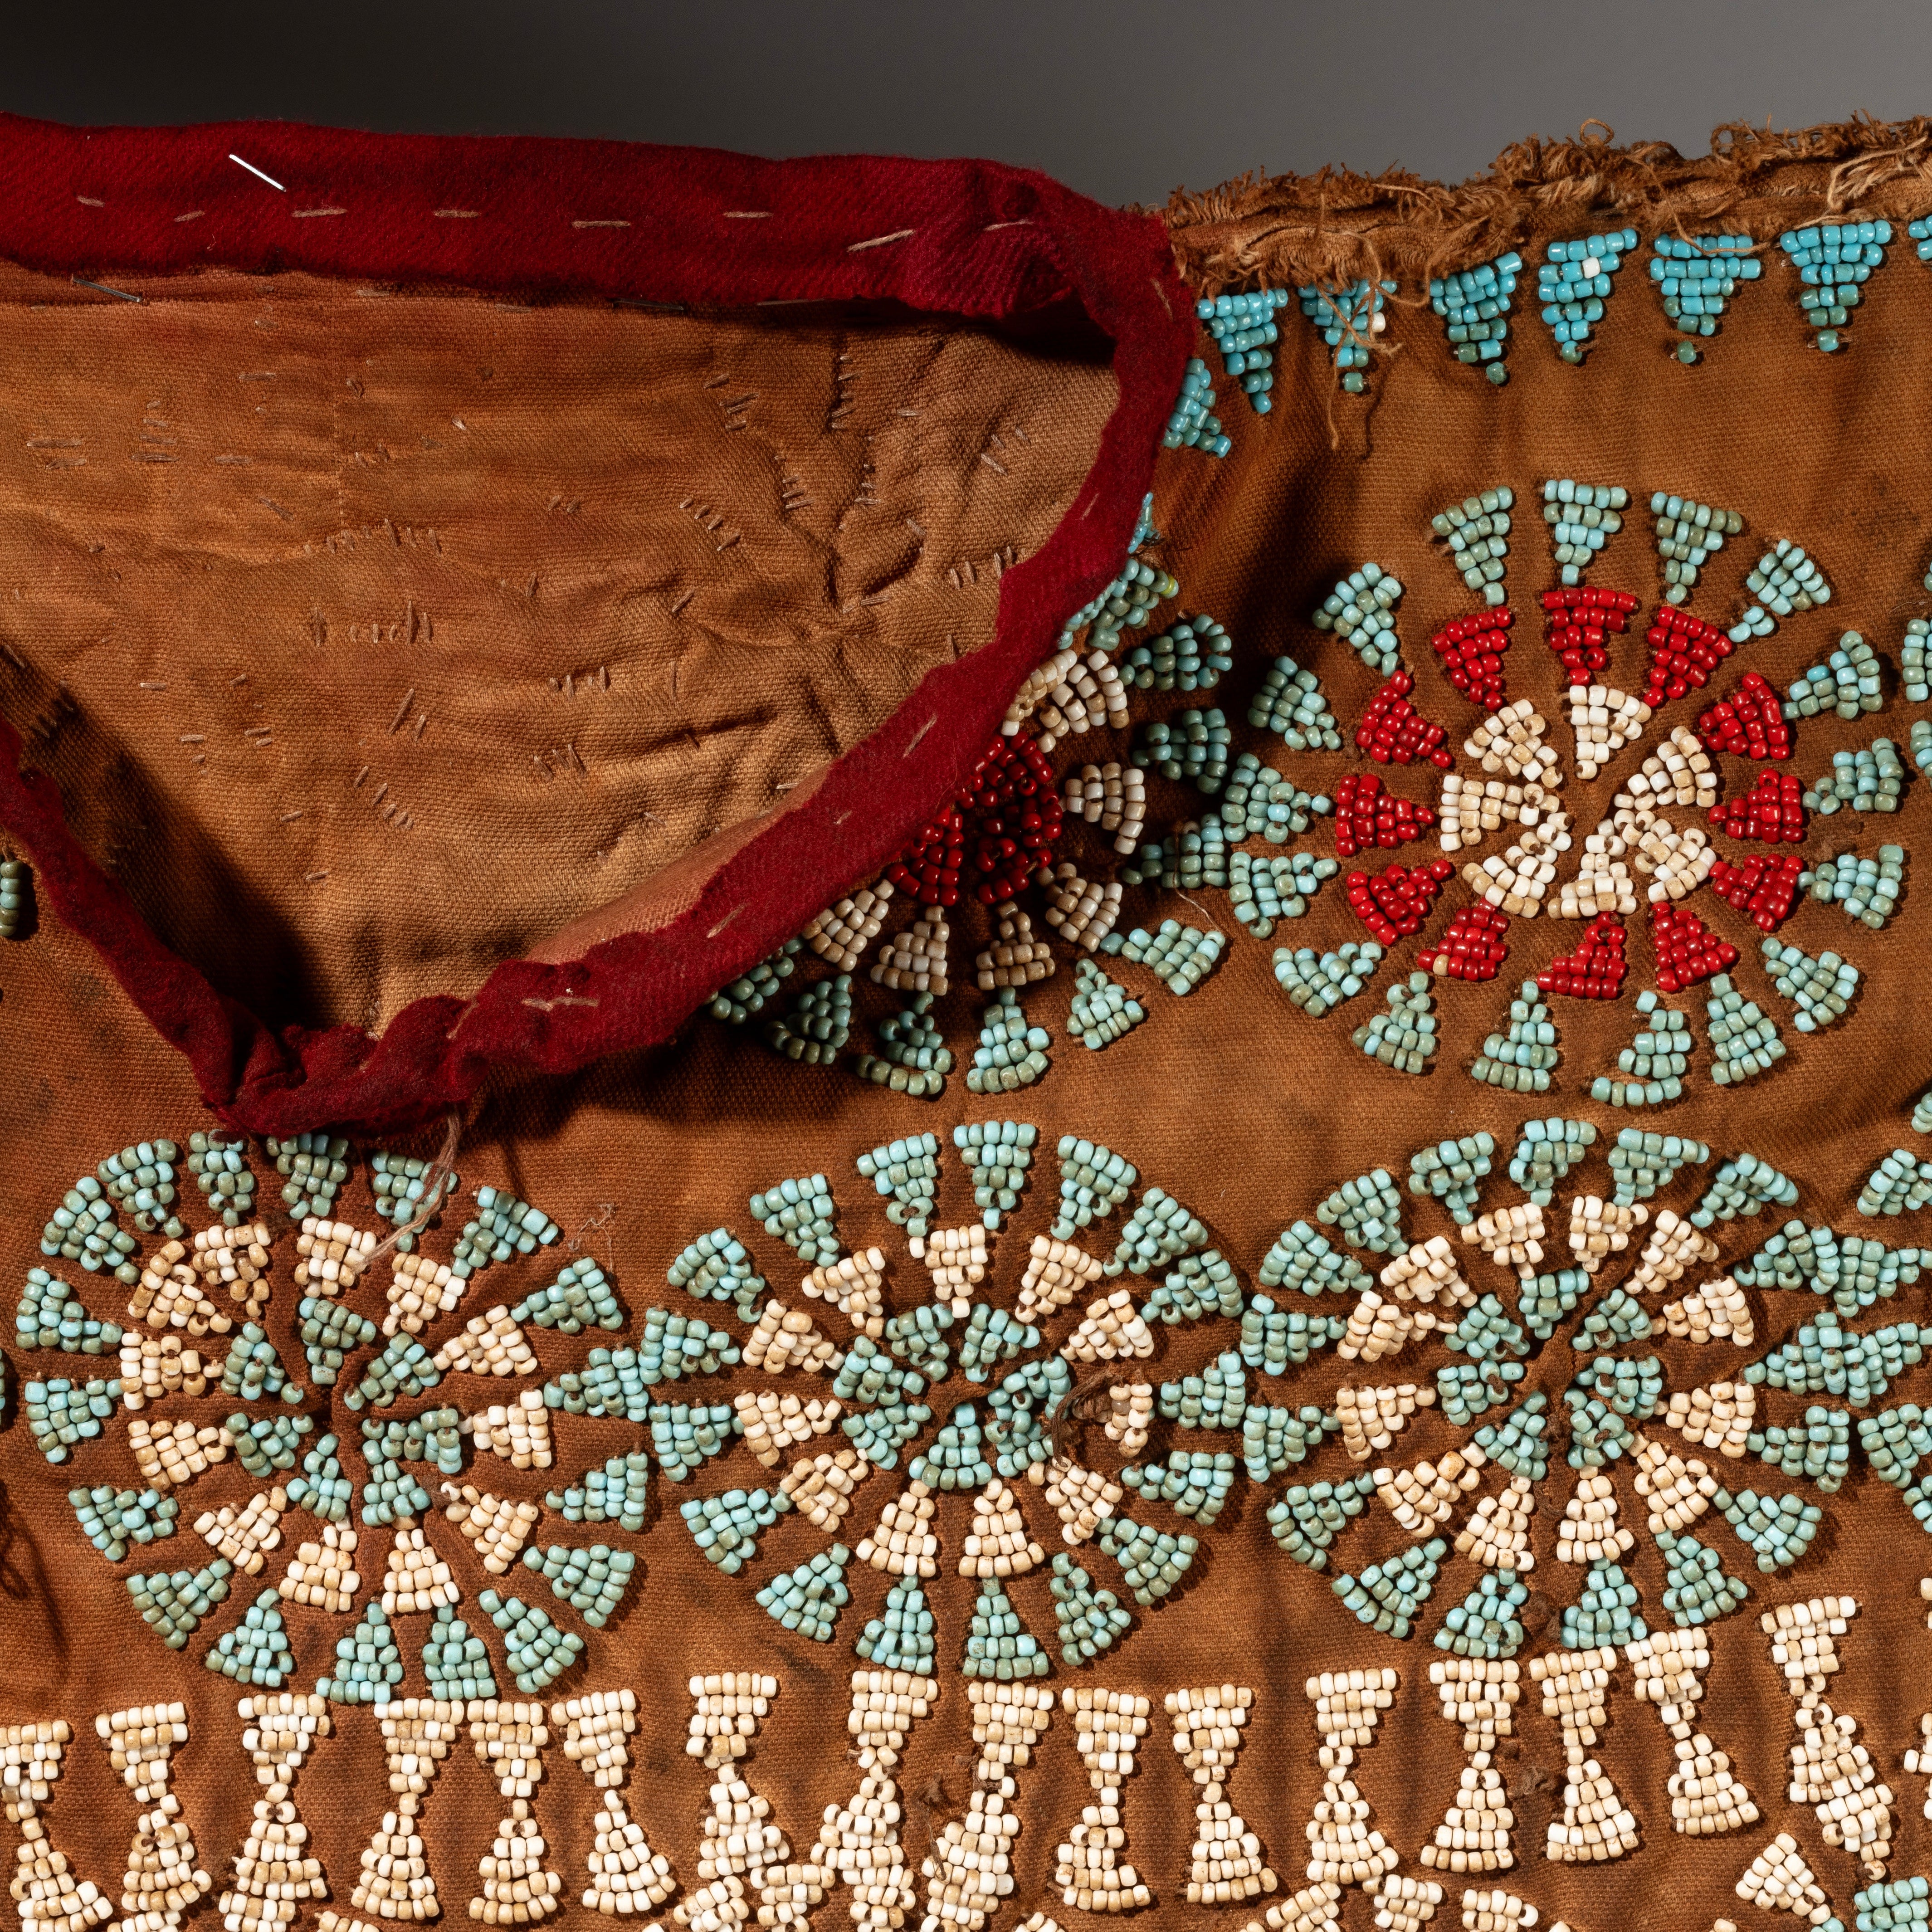 A COSMOLOGICAL BEADED SHIRT FROM THE BAMILEKE TRIBE CAMEROON( No 2339)